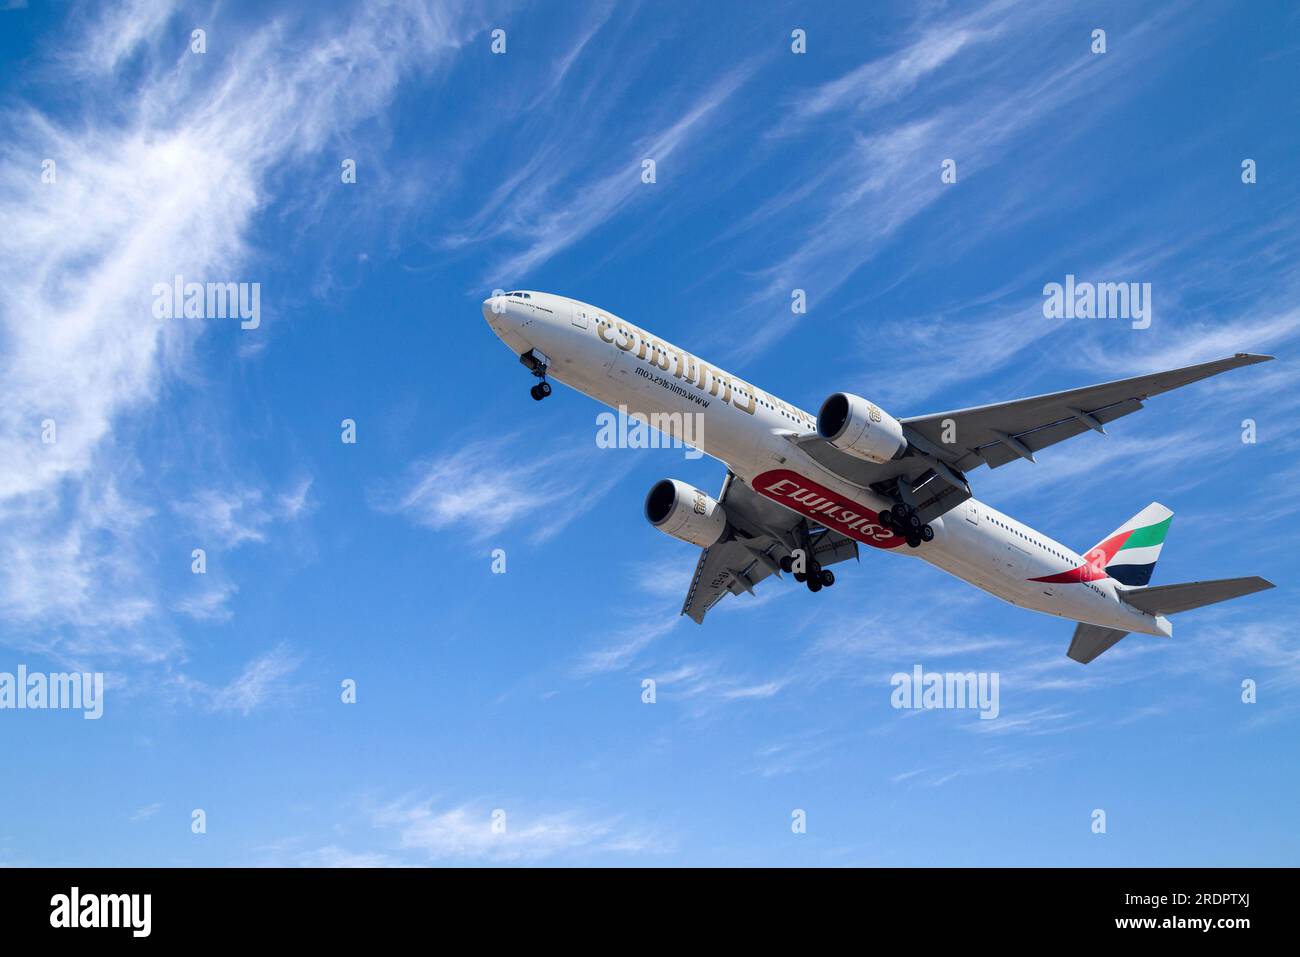 UAE based air company Emirates with aircraft Boeing 777-300ER approaching to land at Lisbon International Airport Stock Photo